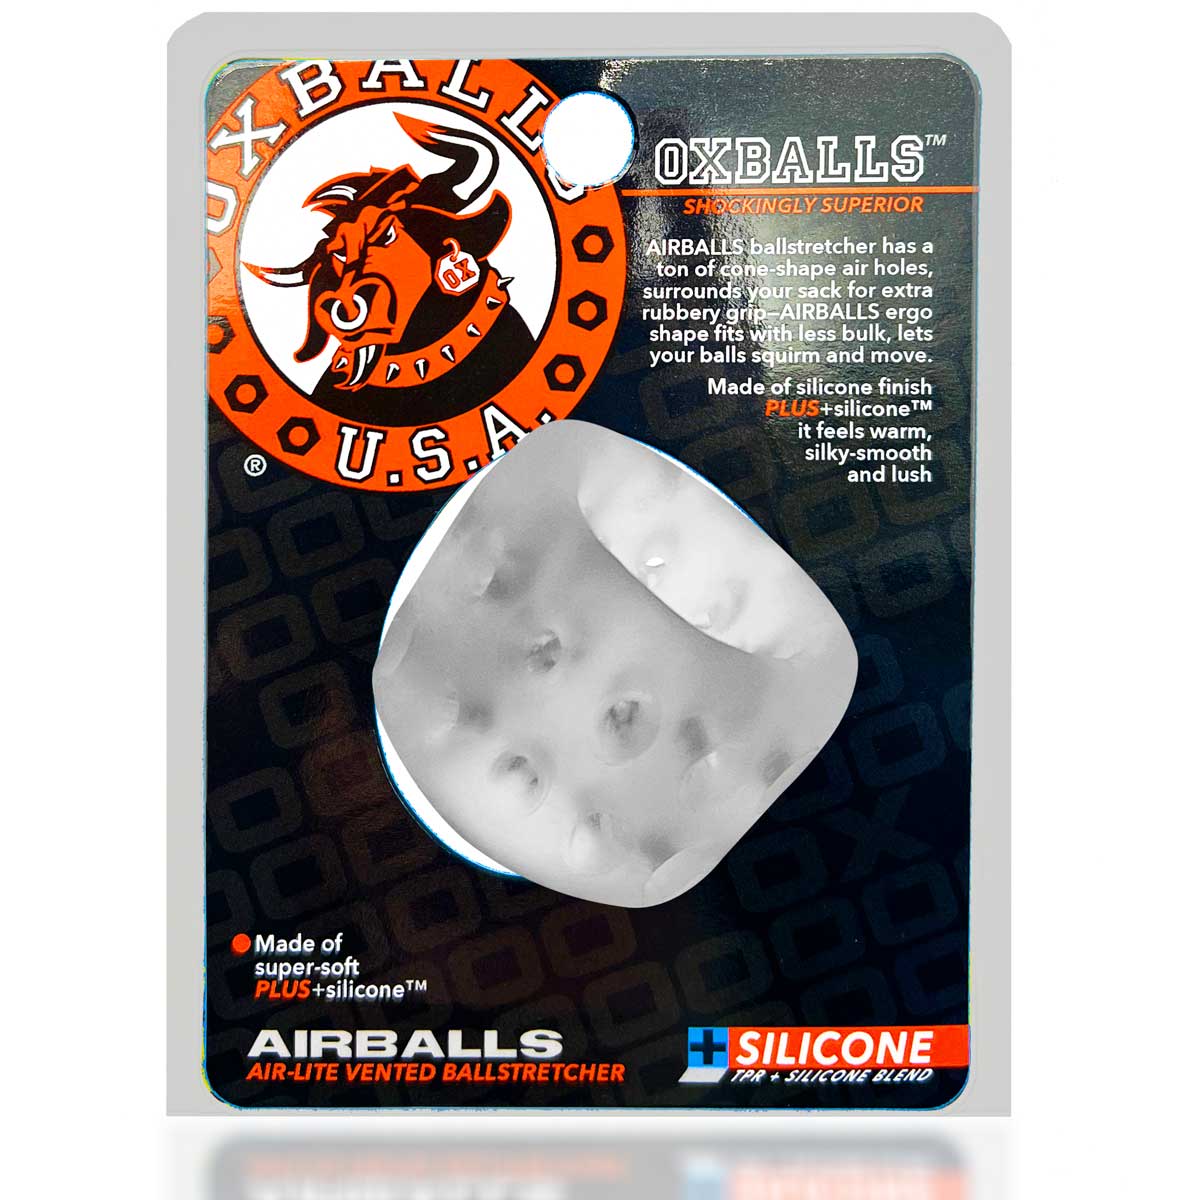 airballs air lite vented ball stretcher clear ice